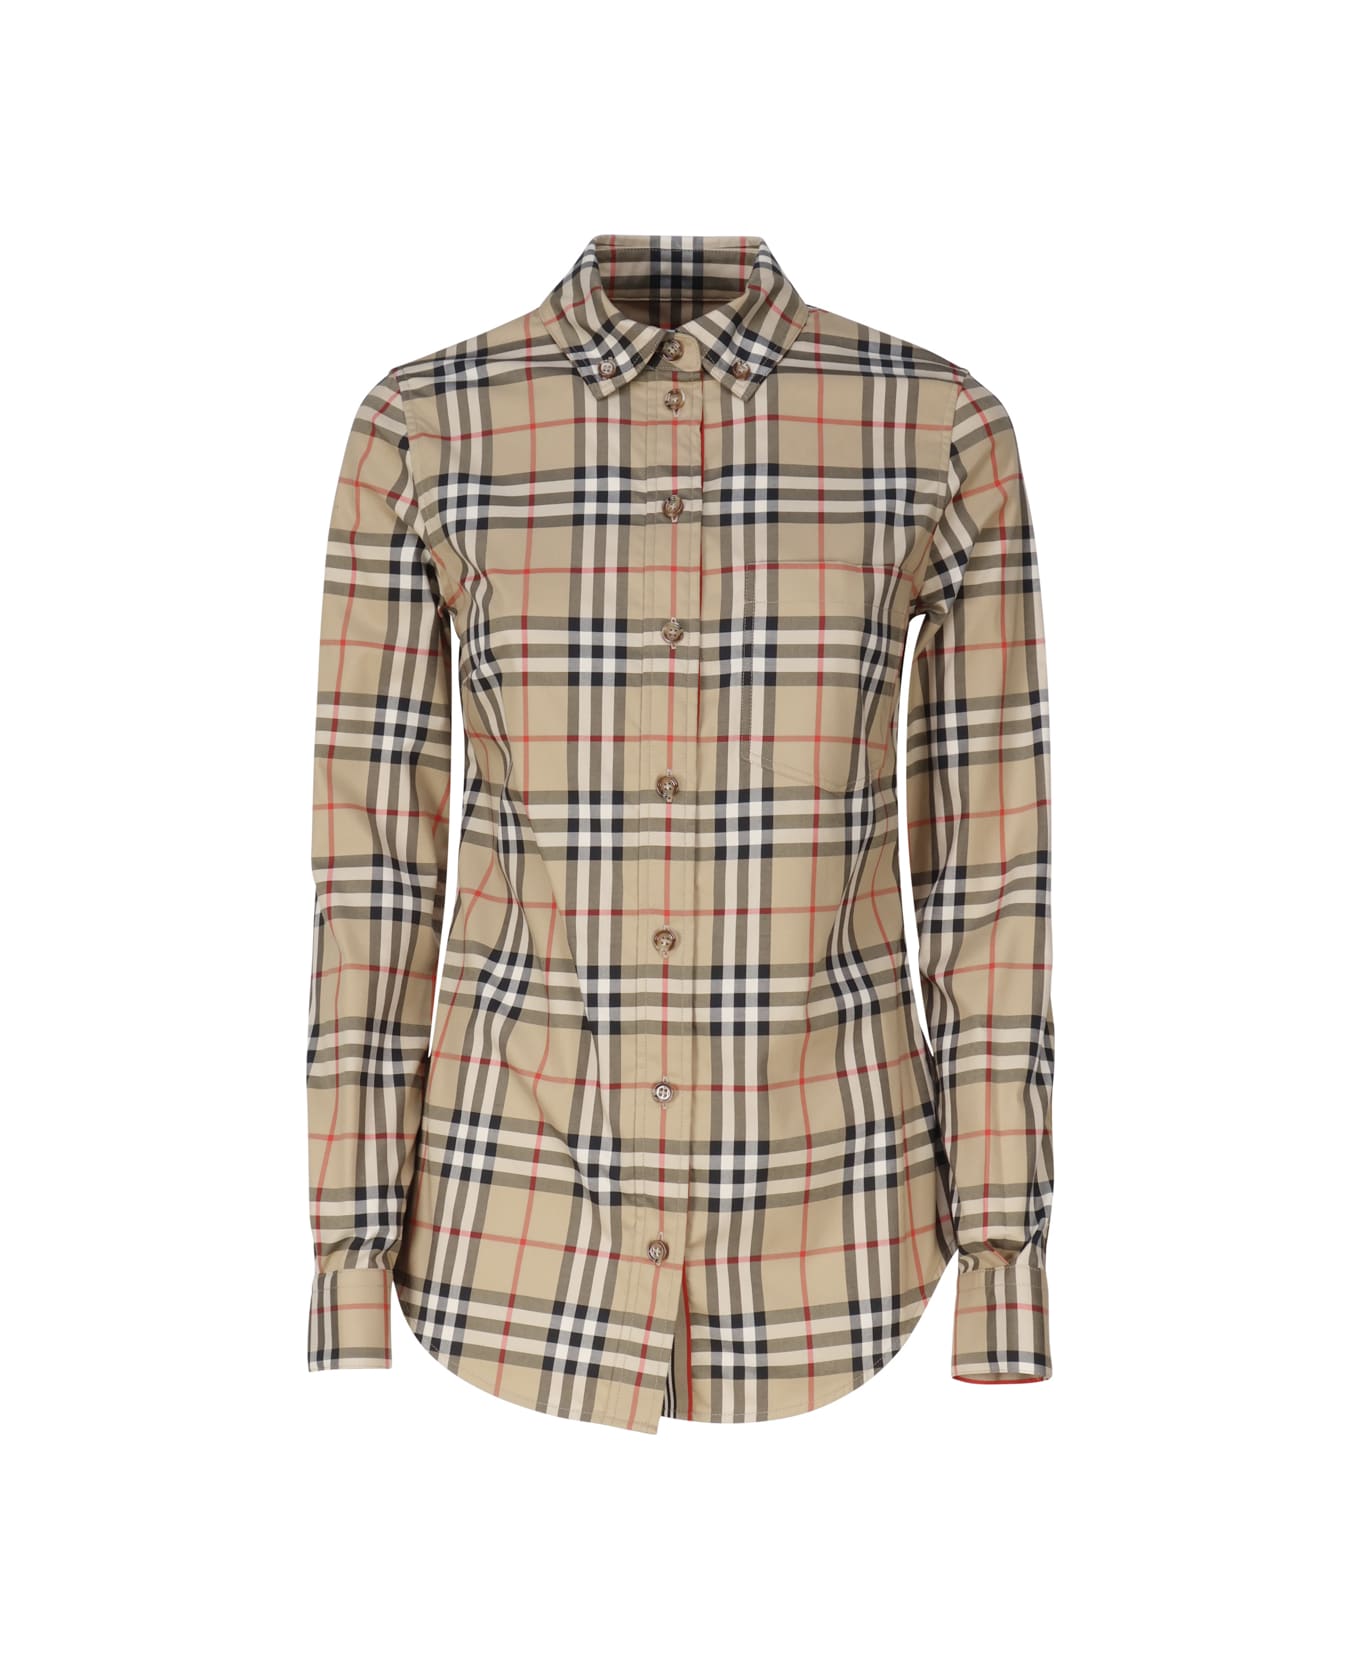 Burberry Shirt With Vintage Check Pattern - Beige シャツ